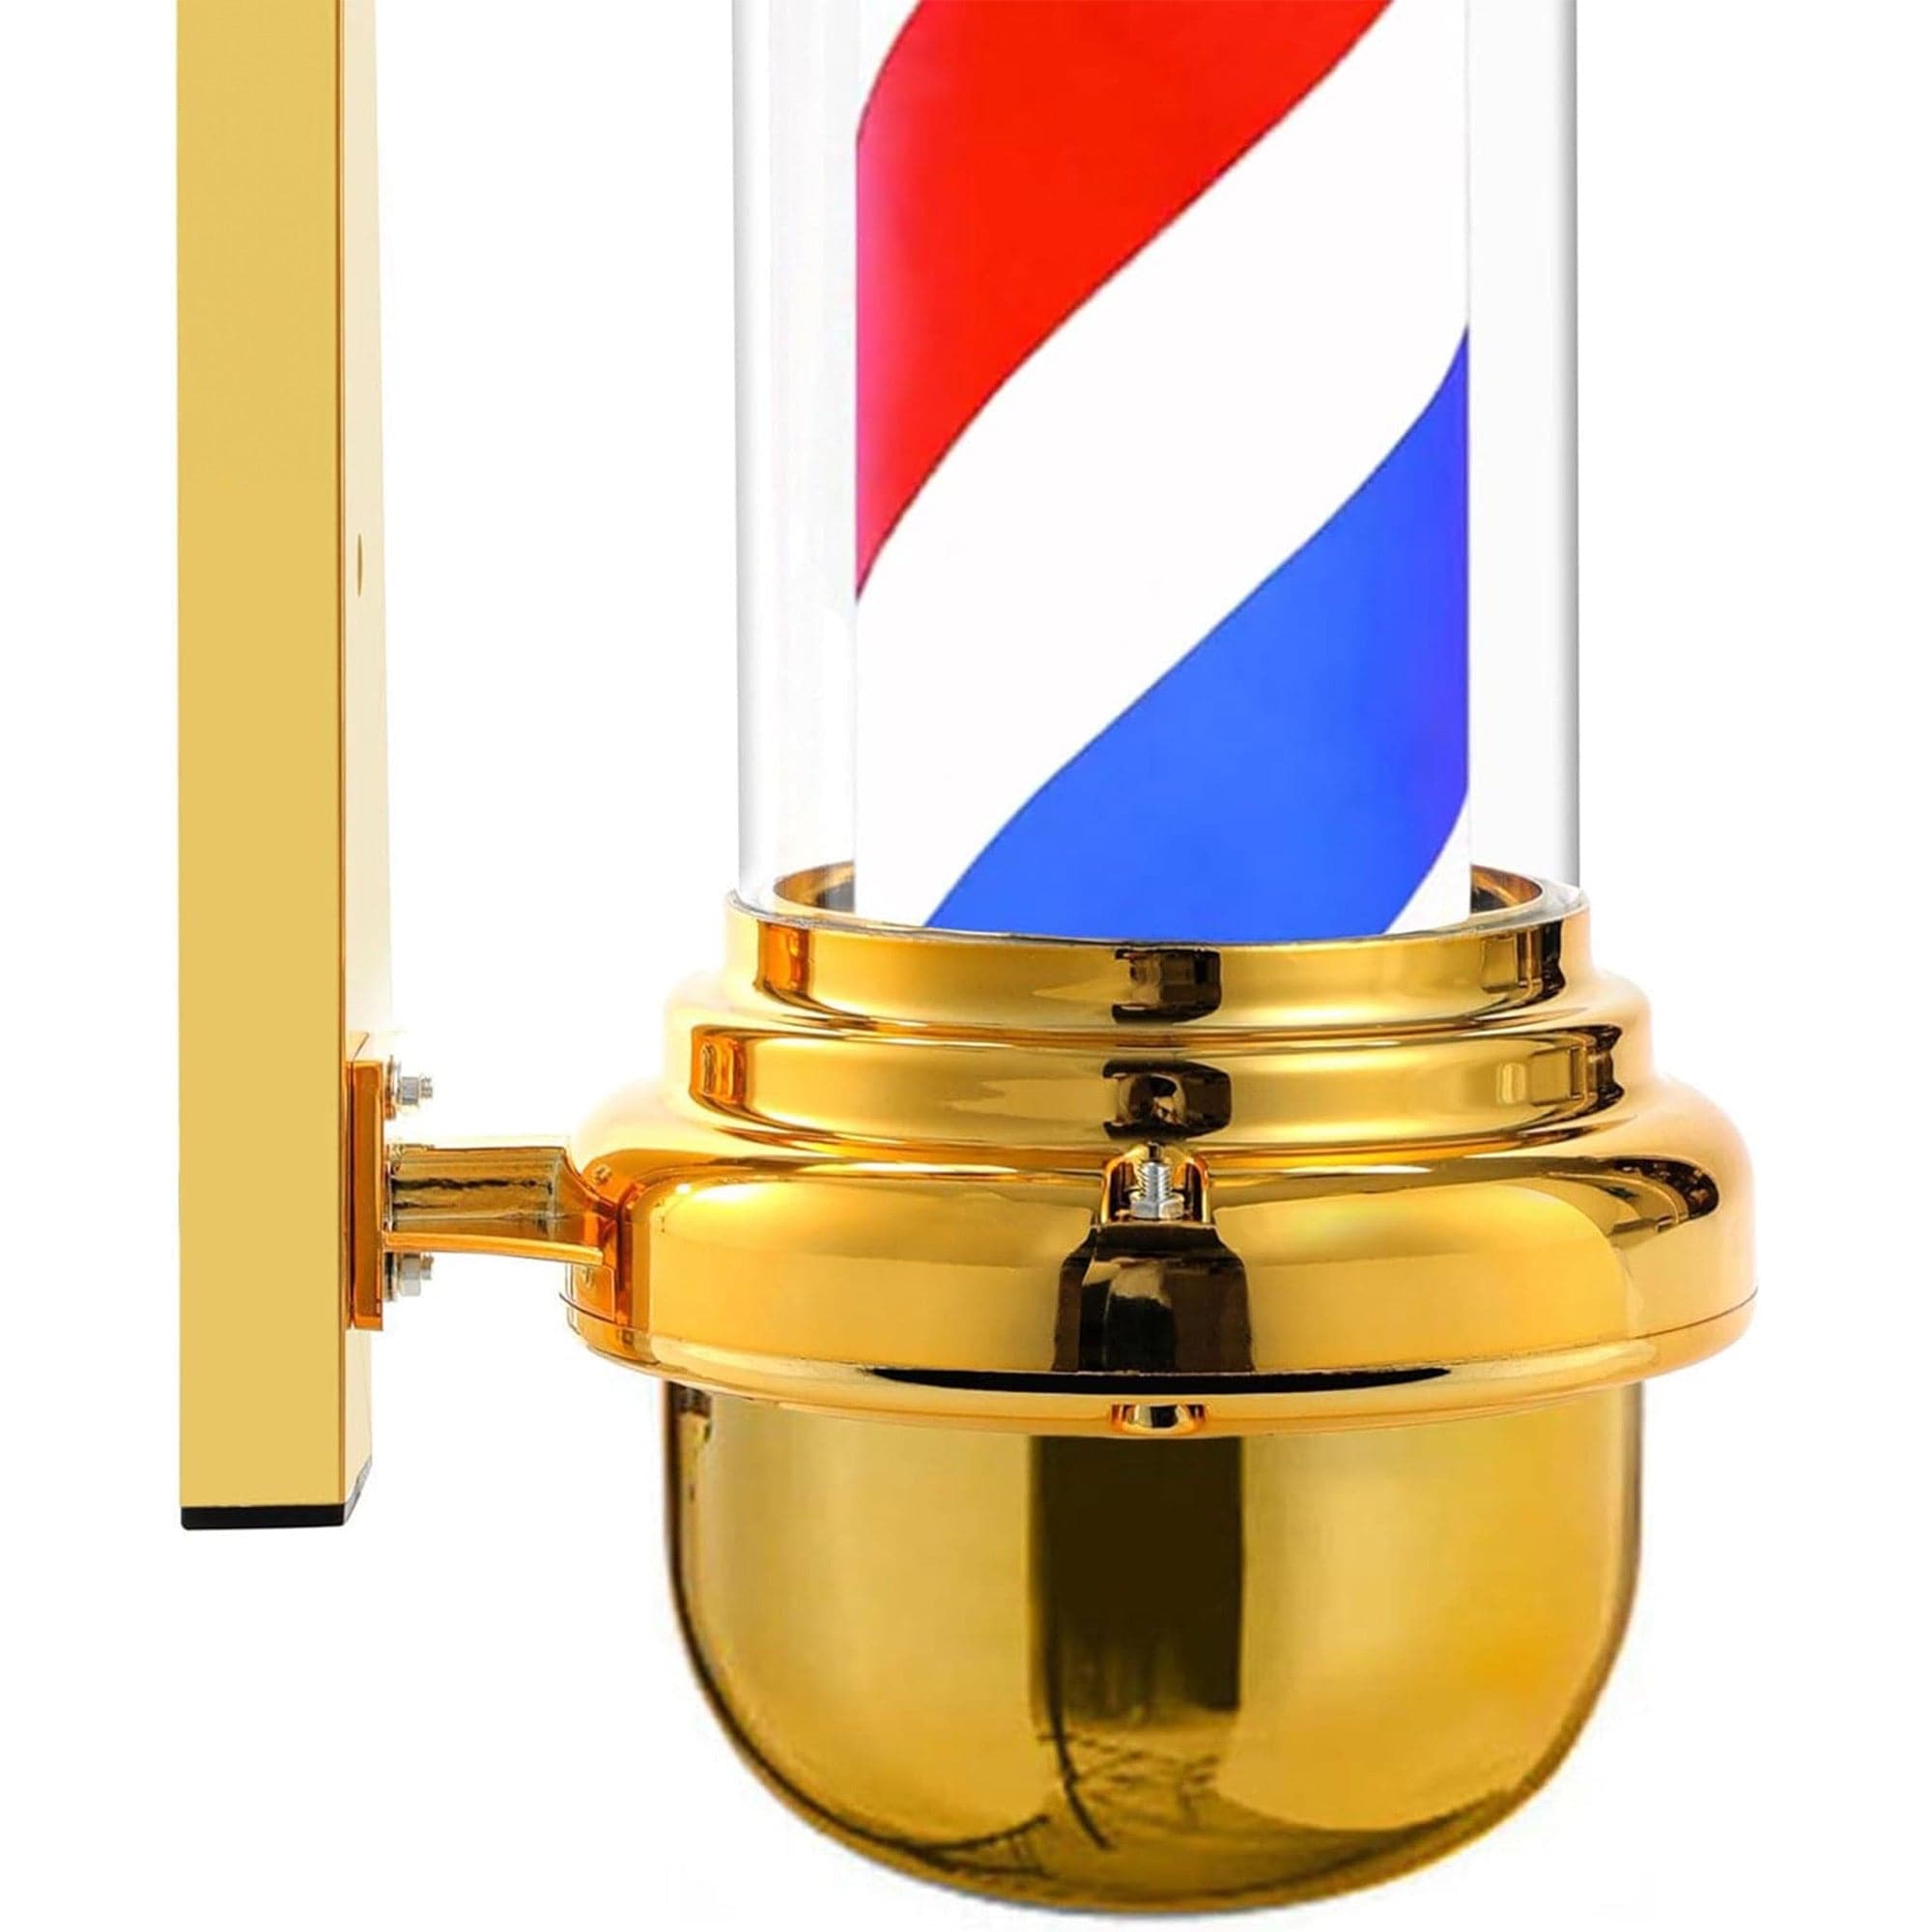 Gabri - Classic Barber Pole Light With Open Sign (Gold Red White Blue Stripes) 85cm